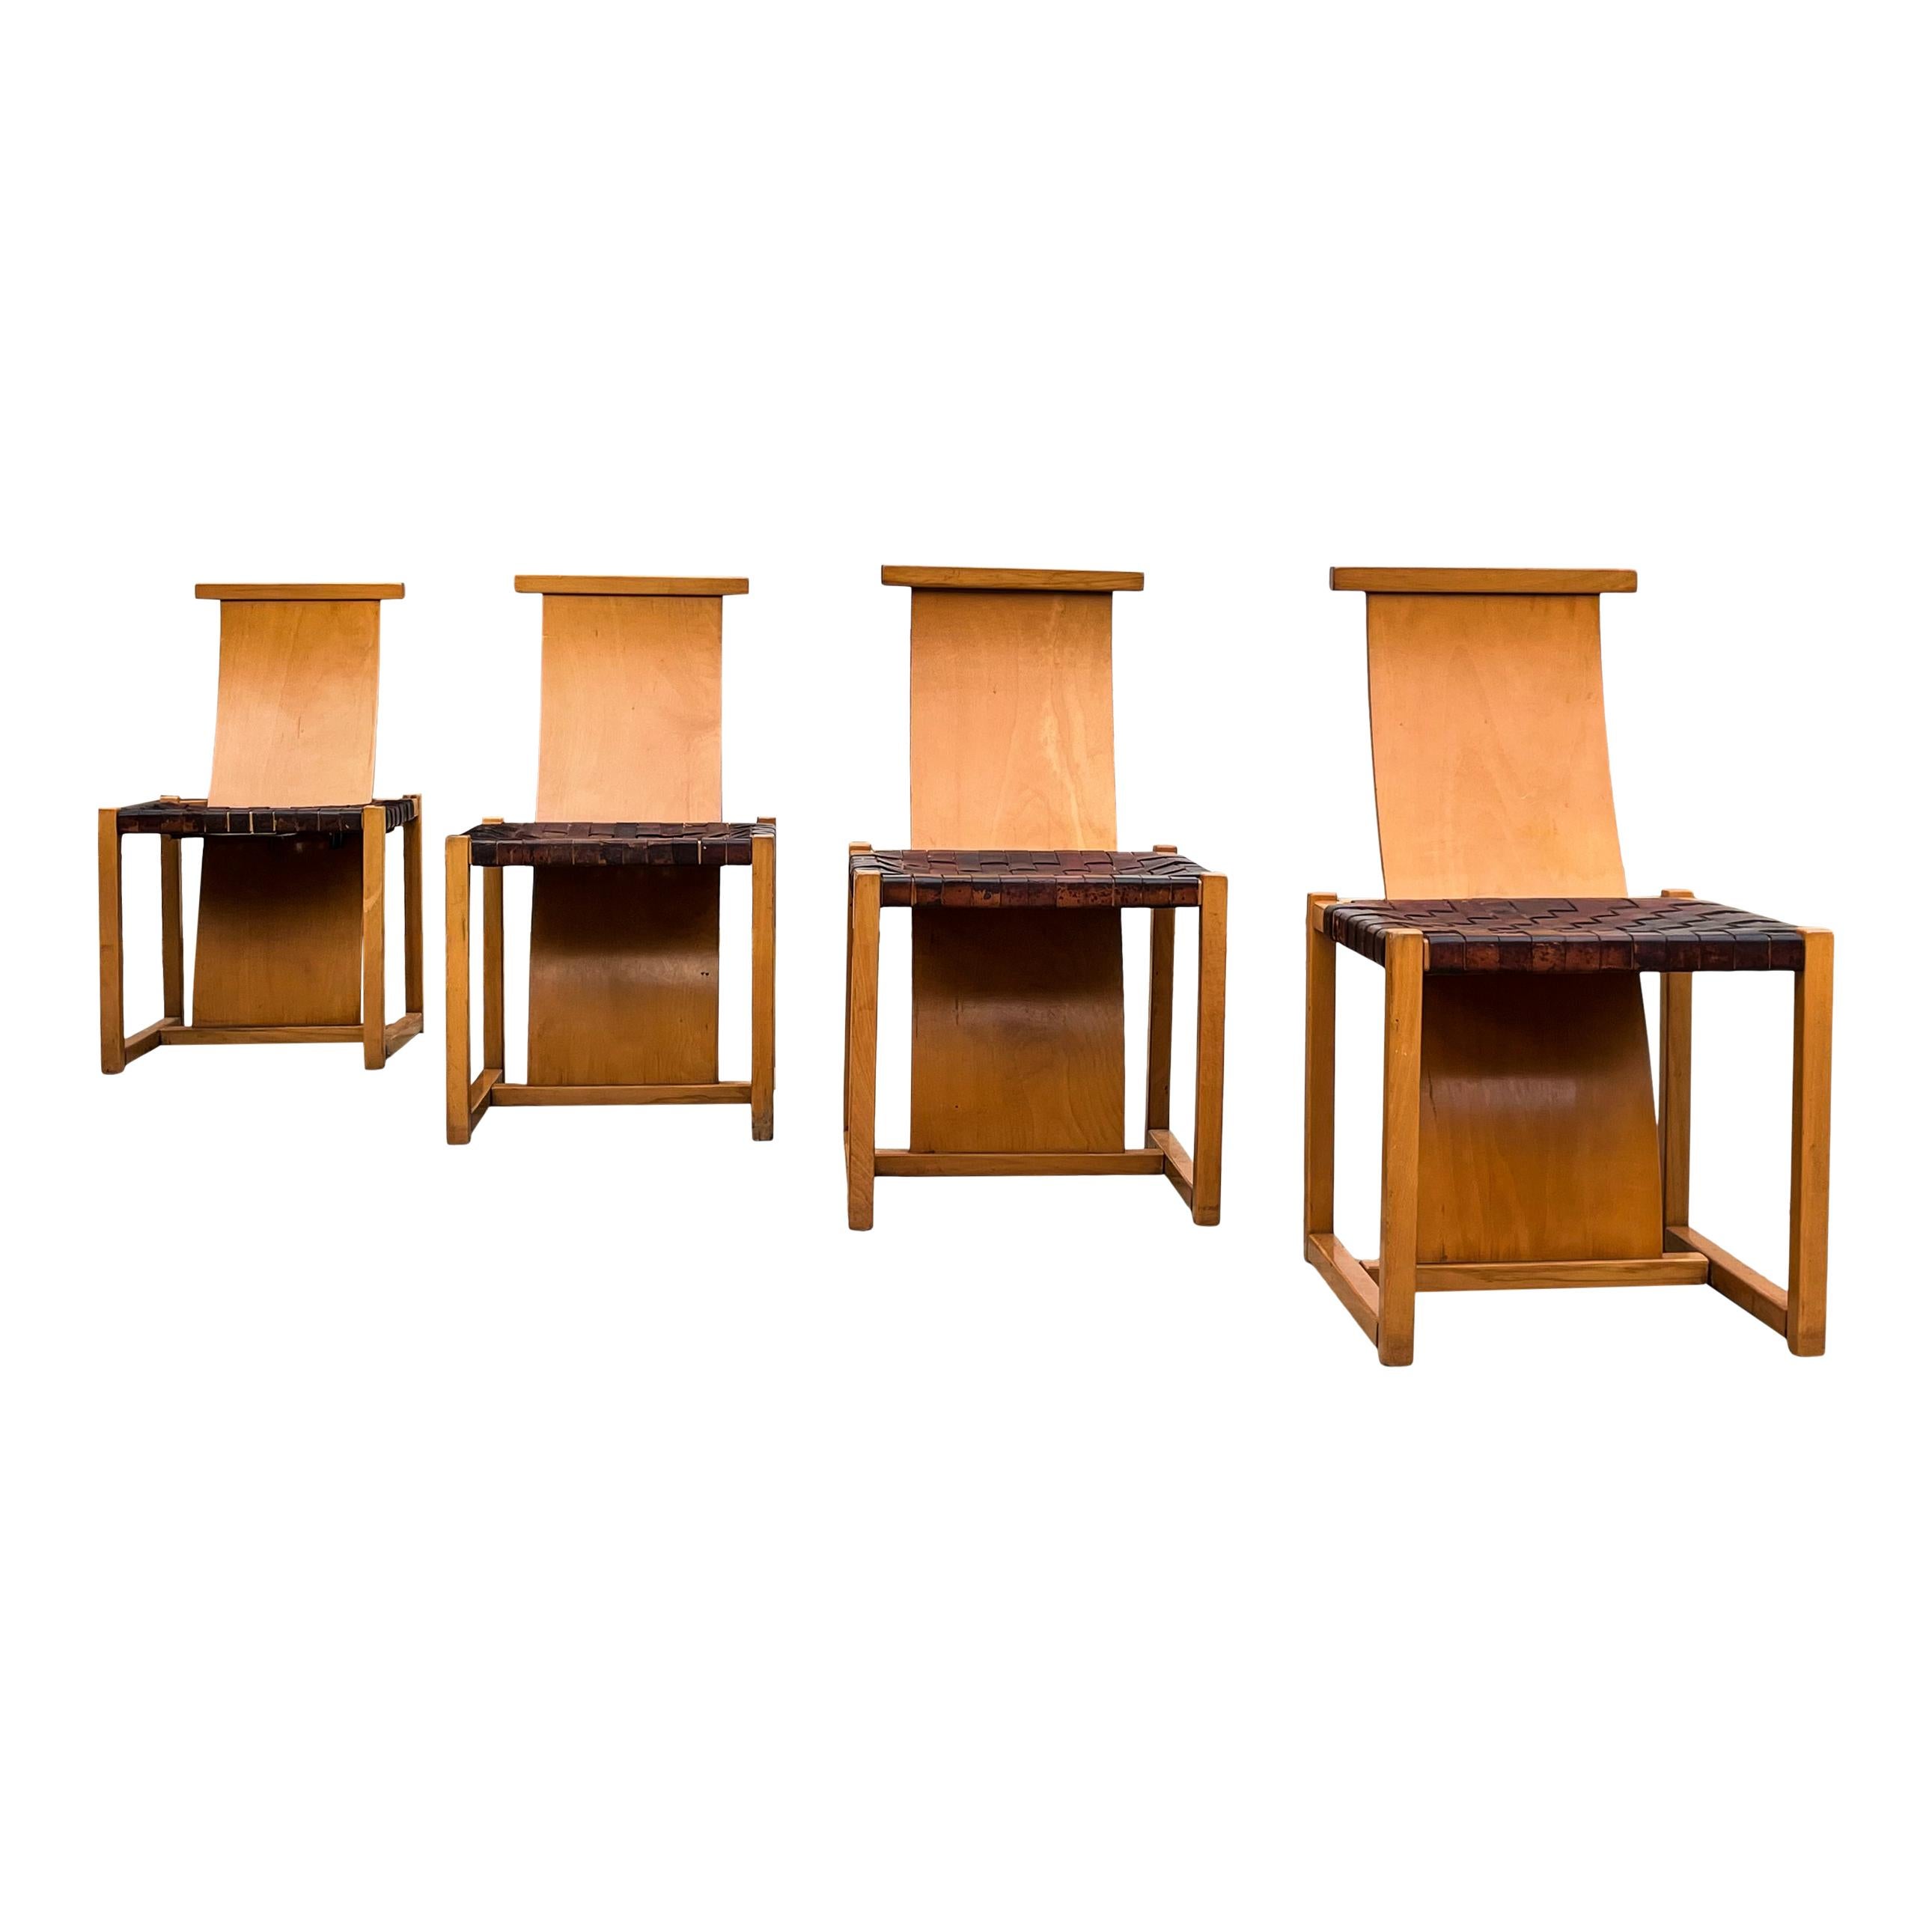 Late 20th Century Midcentury Modern Italian Design Beech & Leather Dining Chairs, 1970s, Set of 4 For Sale